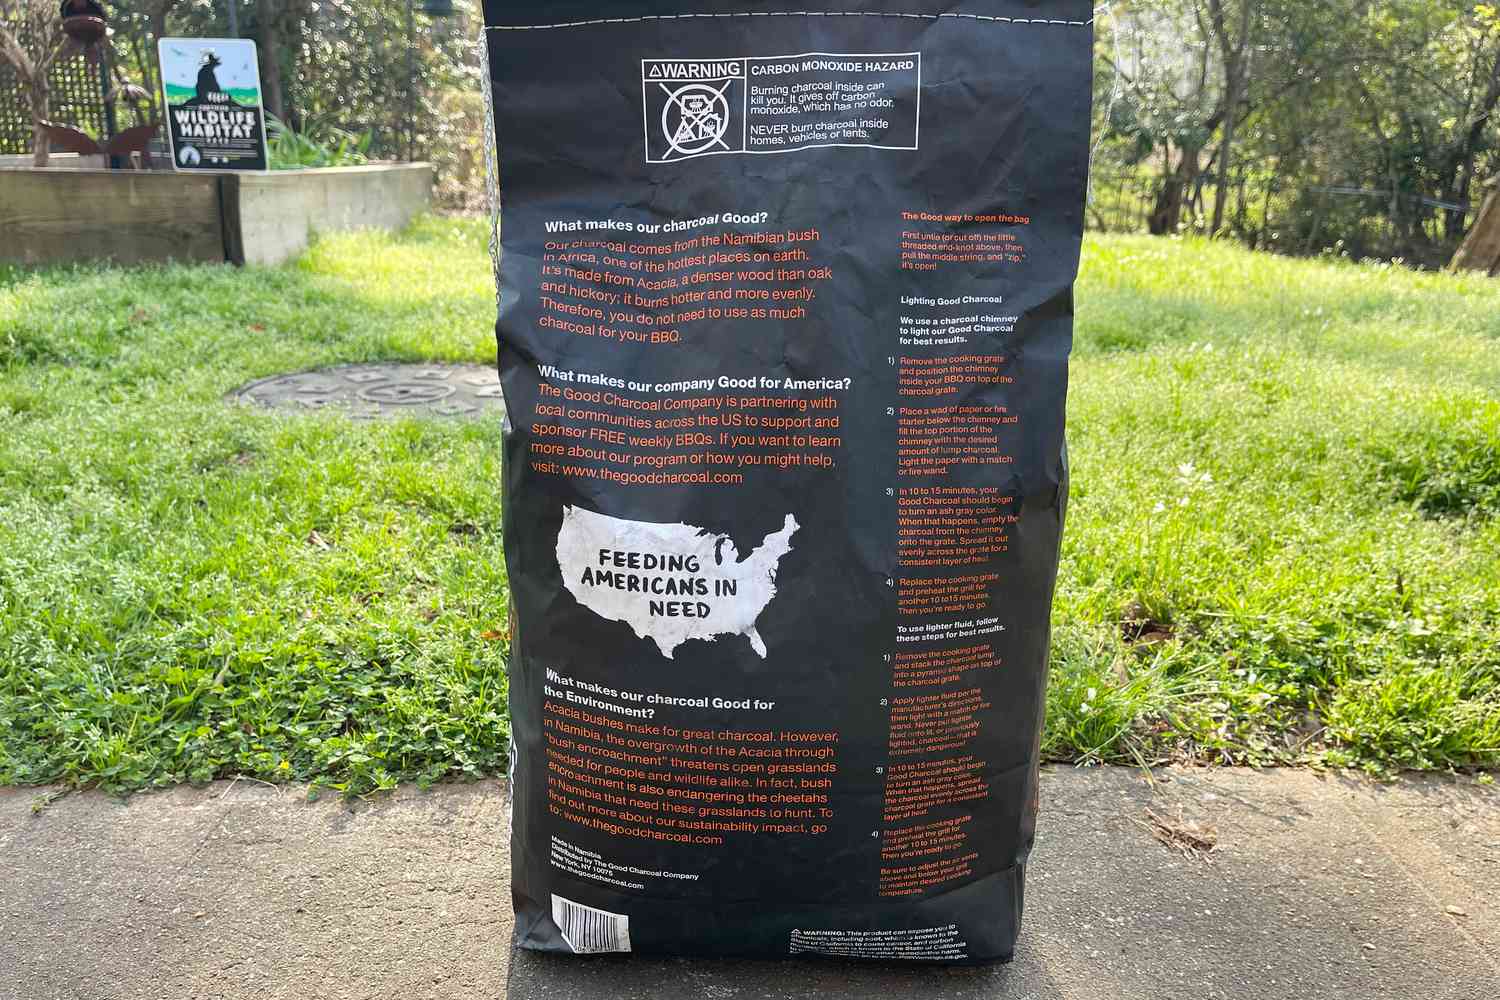 a look at the back of a bag of lump charcoal